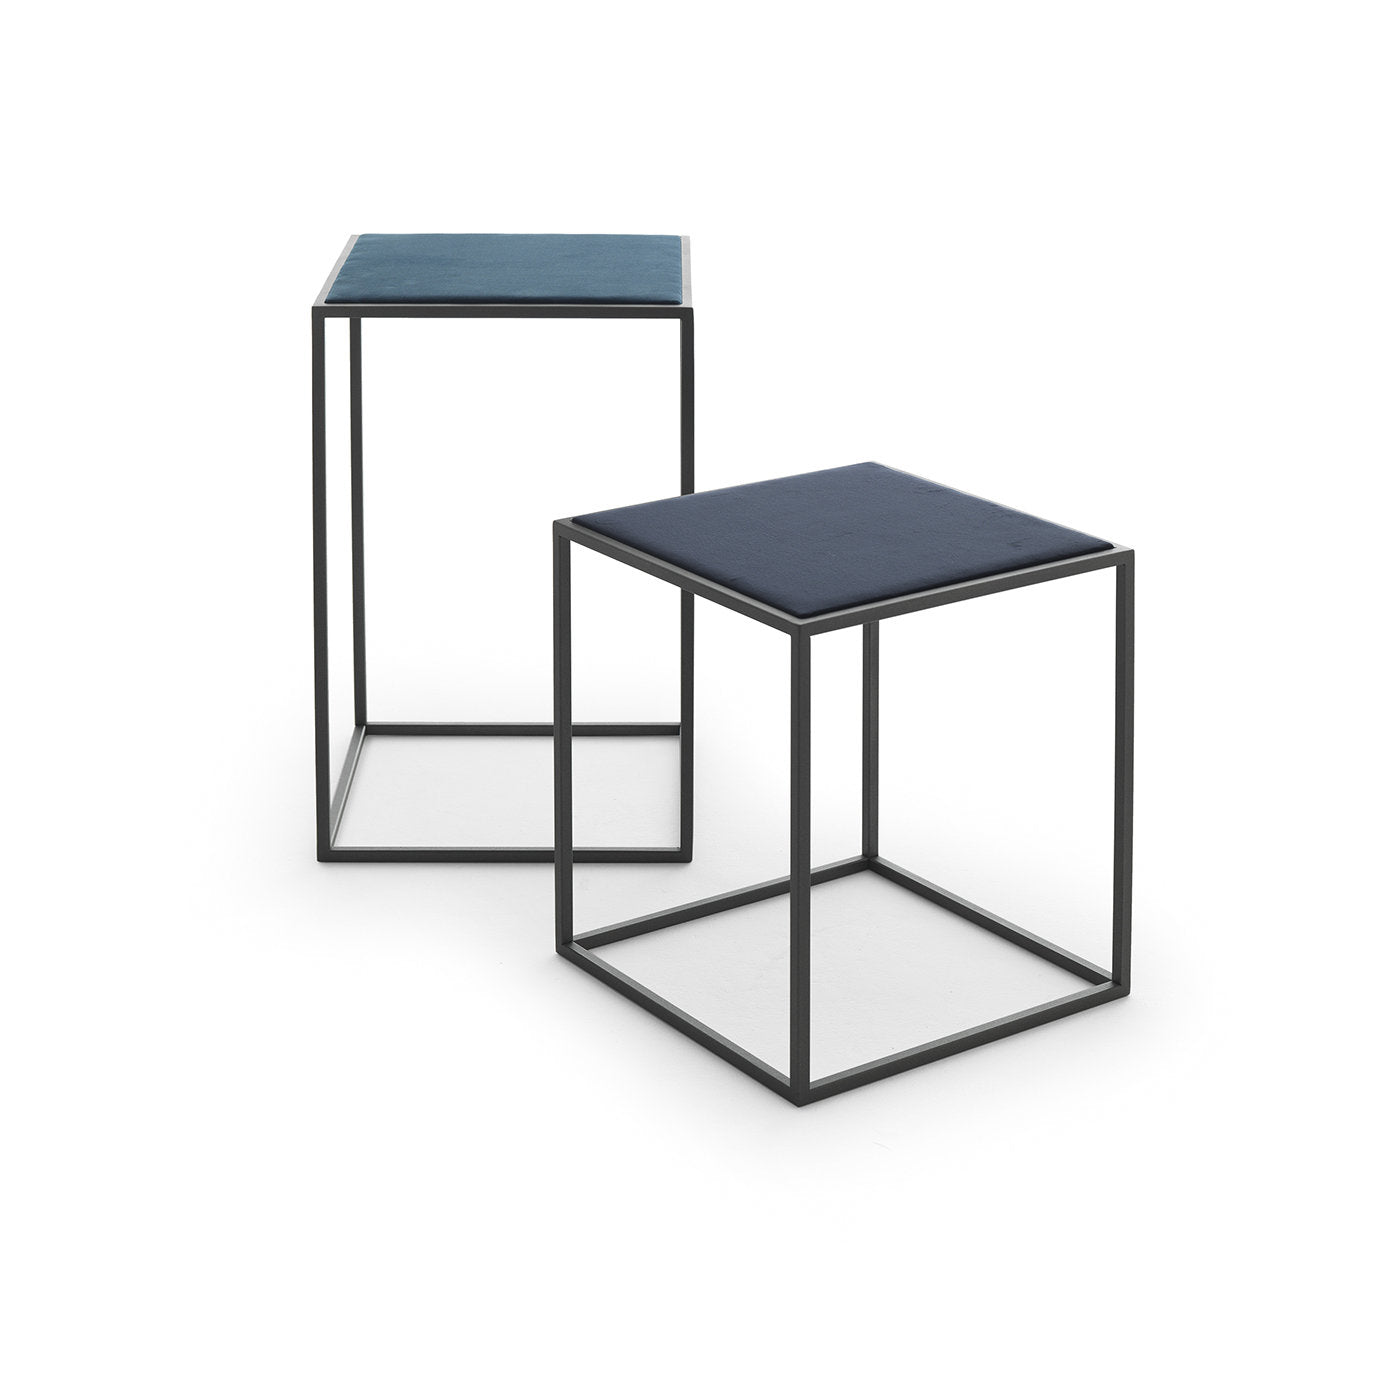 Gotham Low Side Table - Alternative view 1